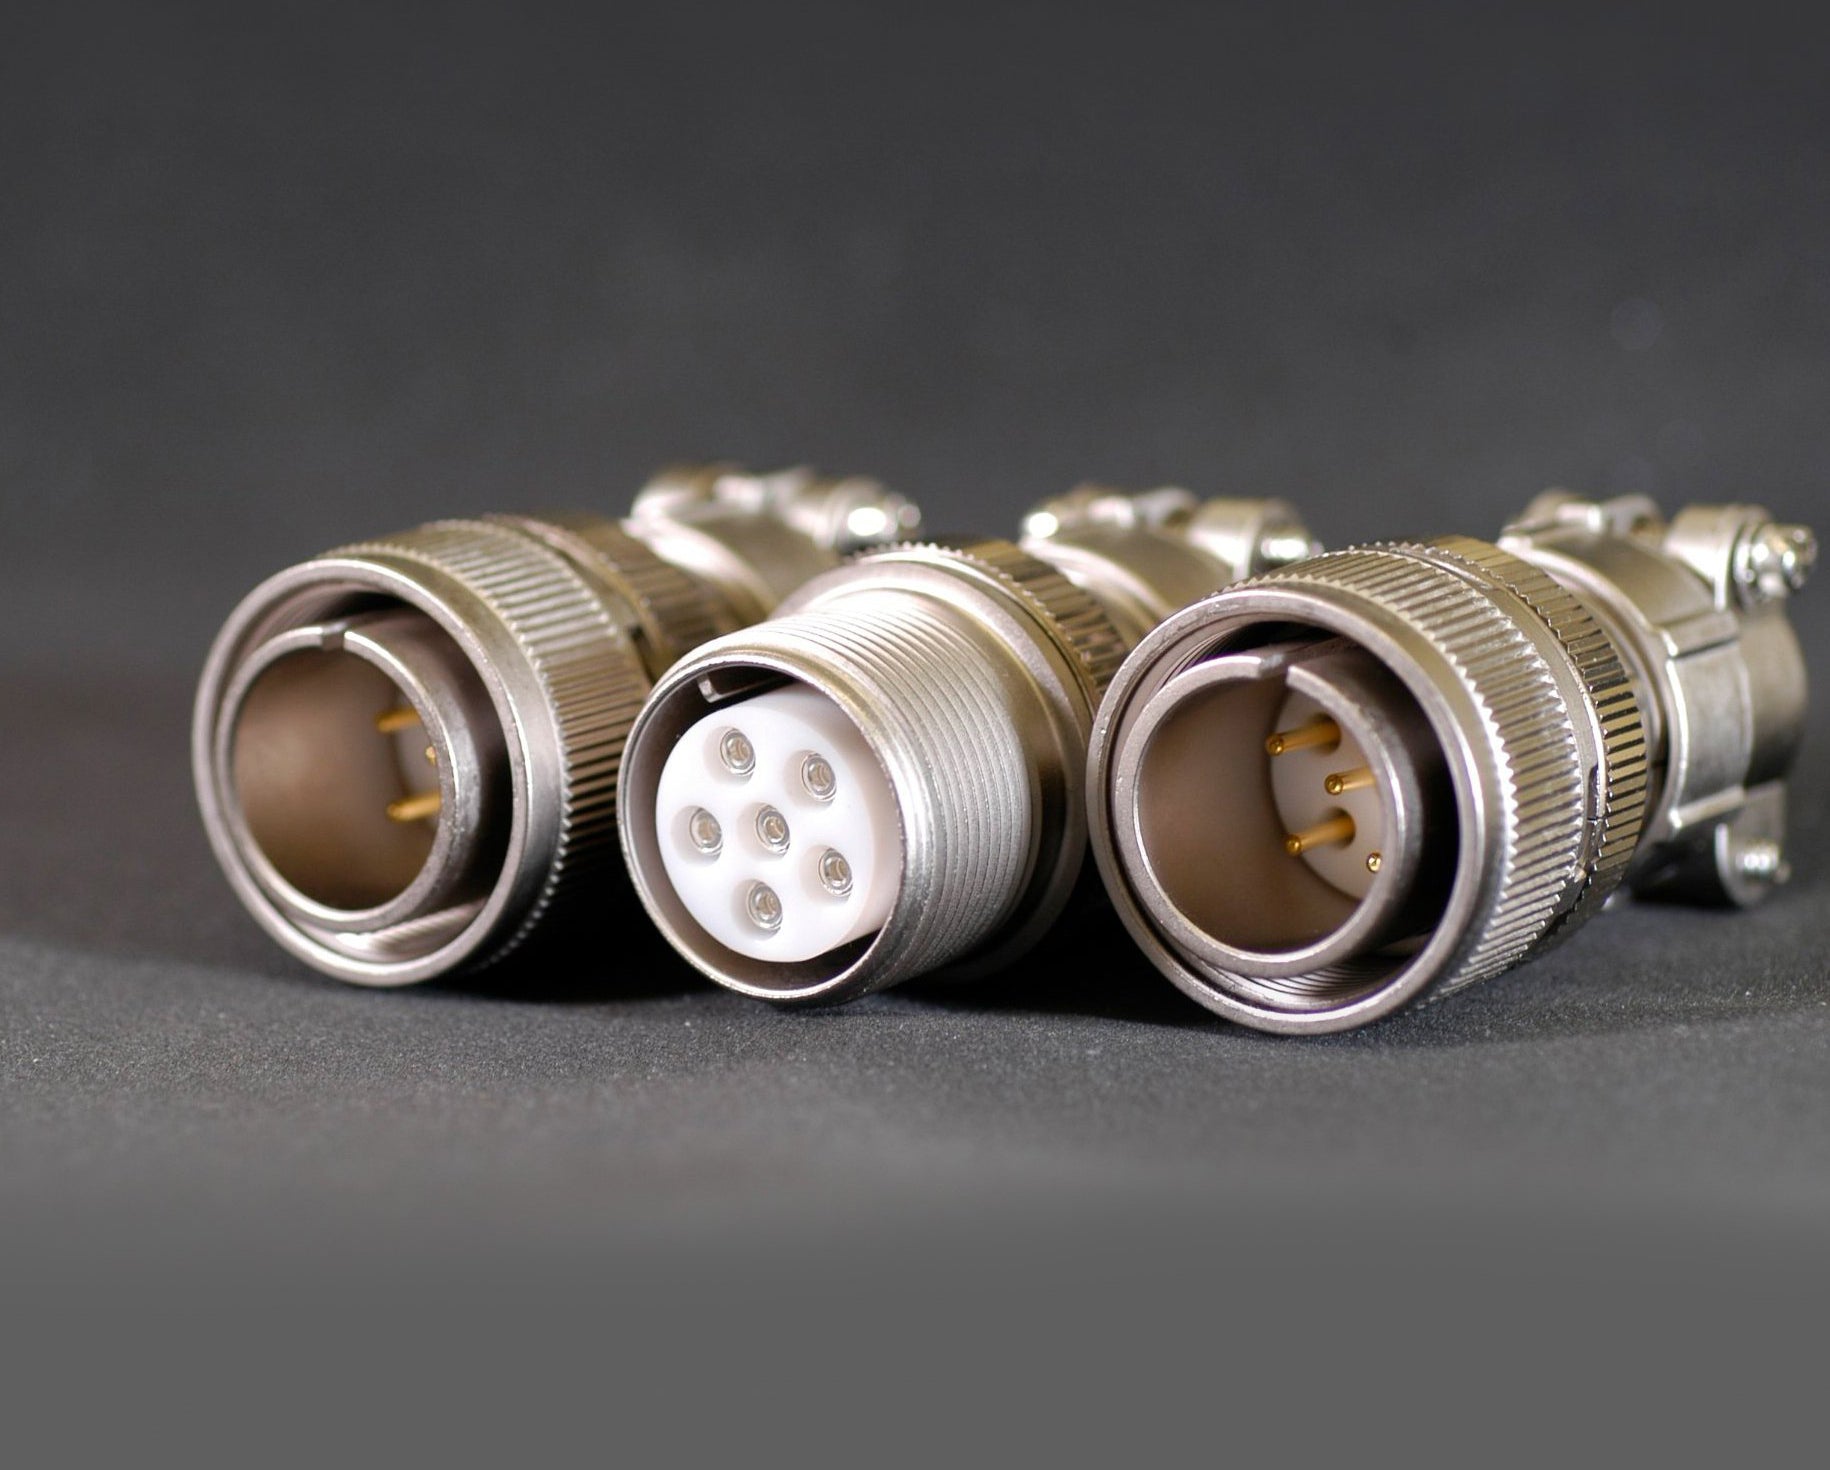 high-performance custom-made connectors by Globetech